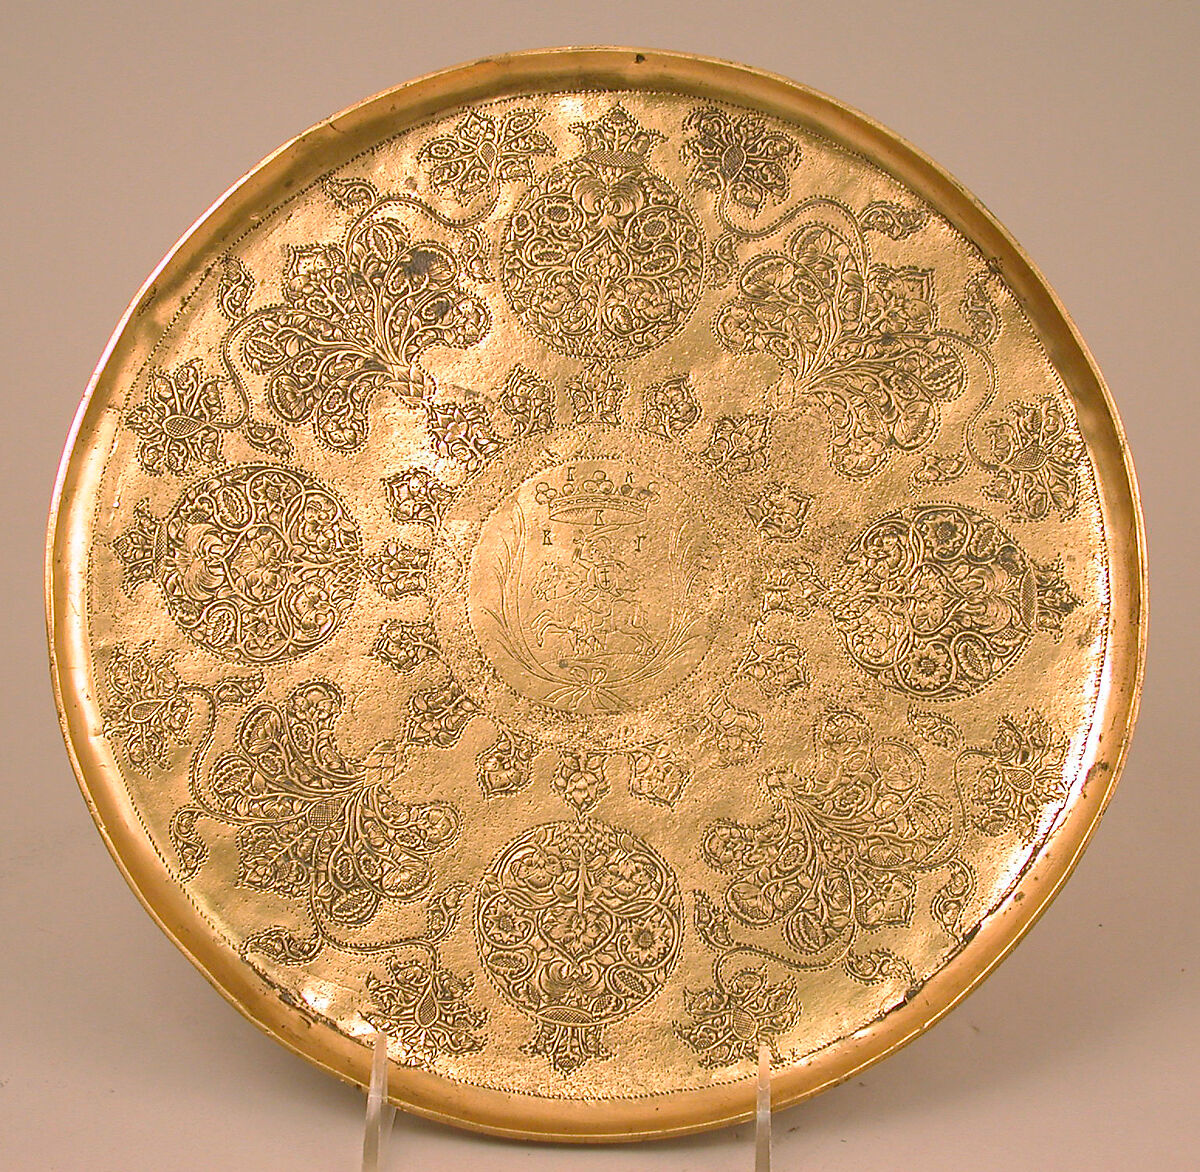 Plate, Silver on base metal, British, after Russian original 